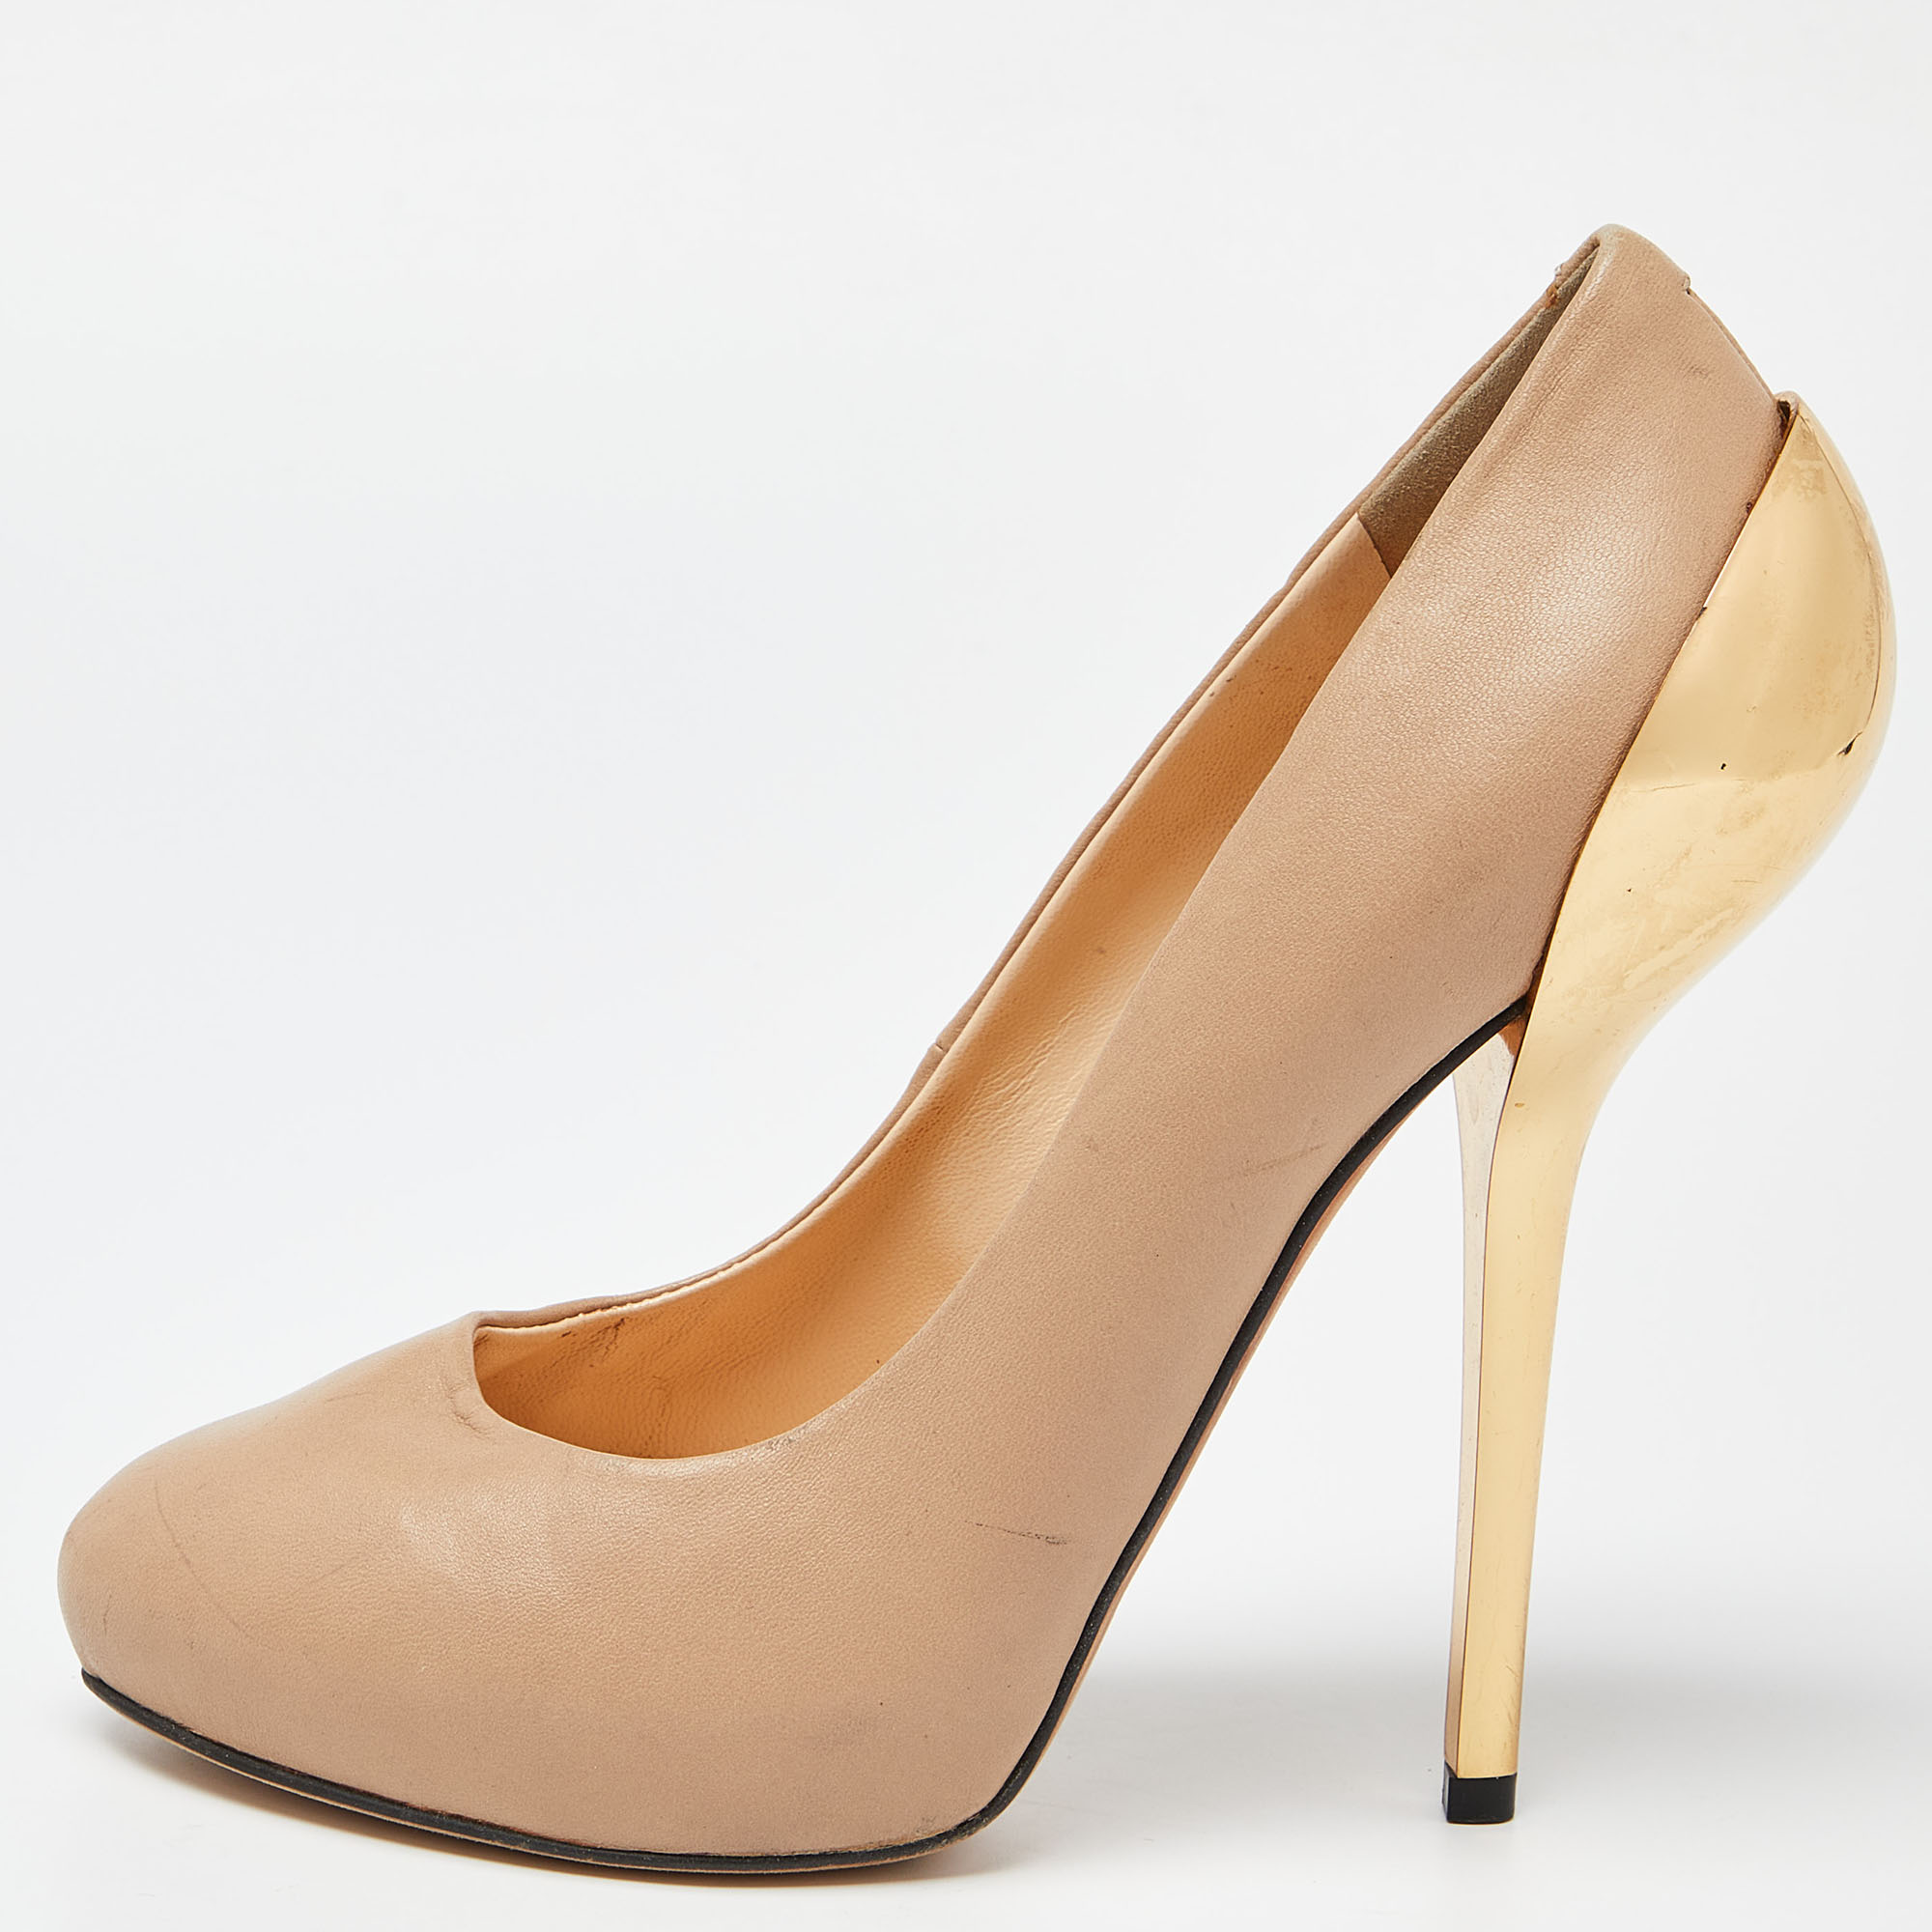 Pre-owned Giuseppe Zanotti Beige Leather Round Top Pumps Size 36